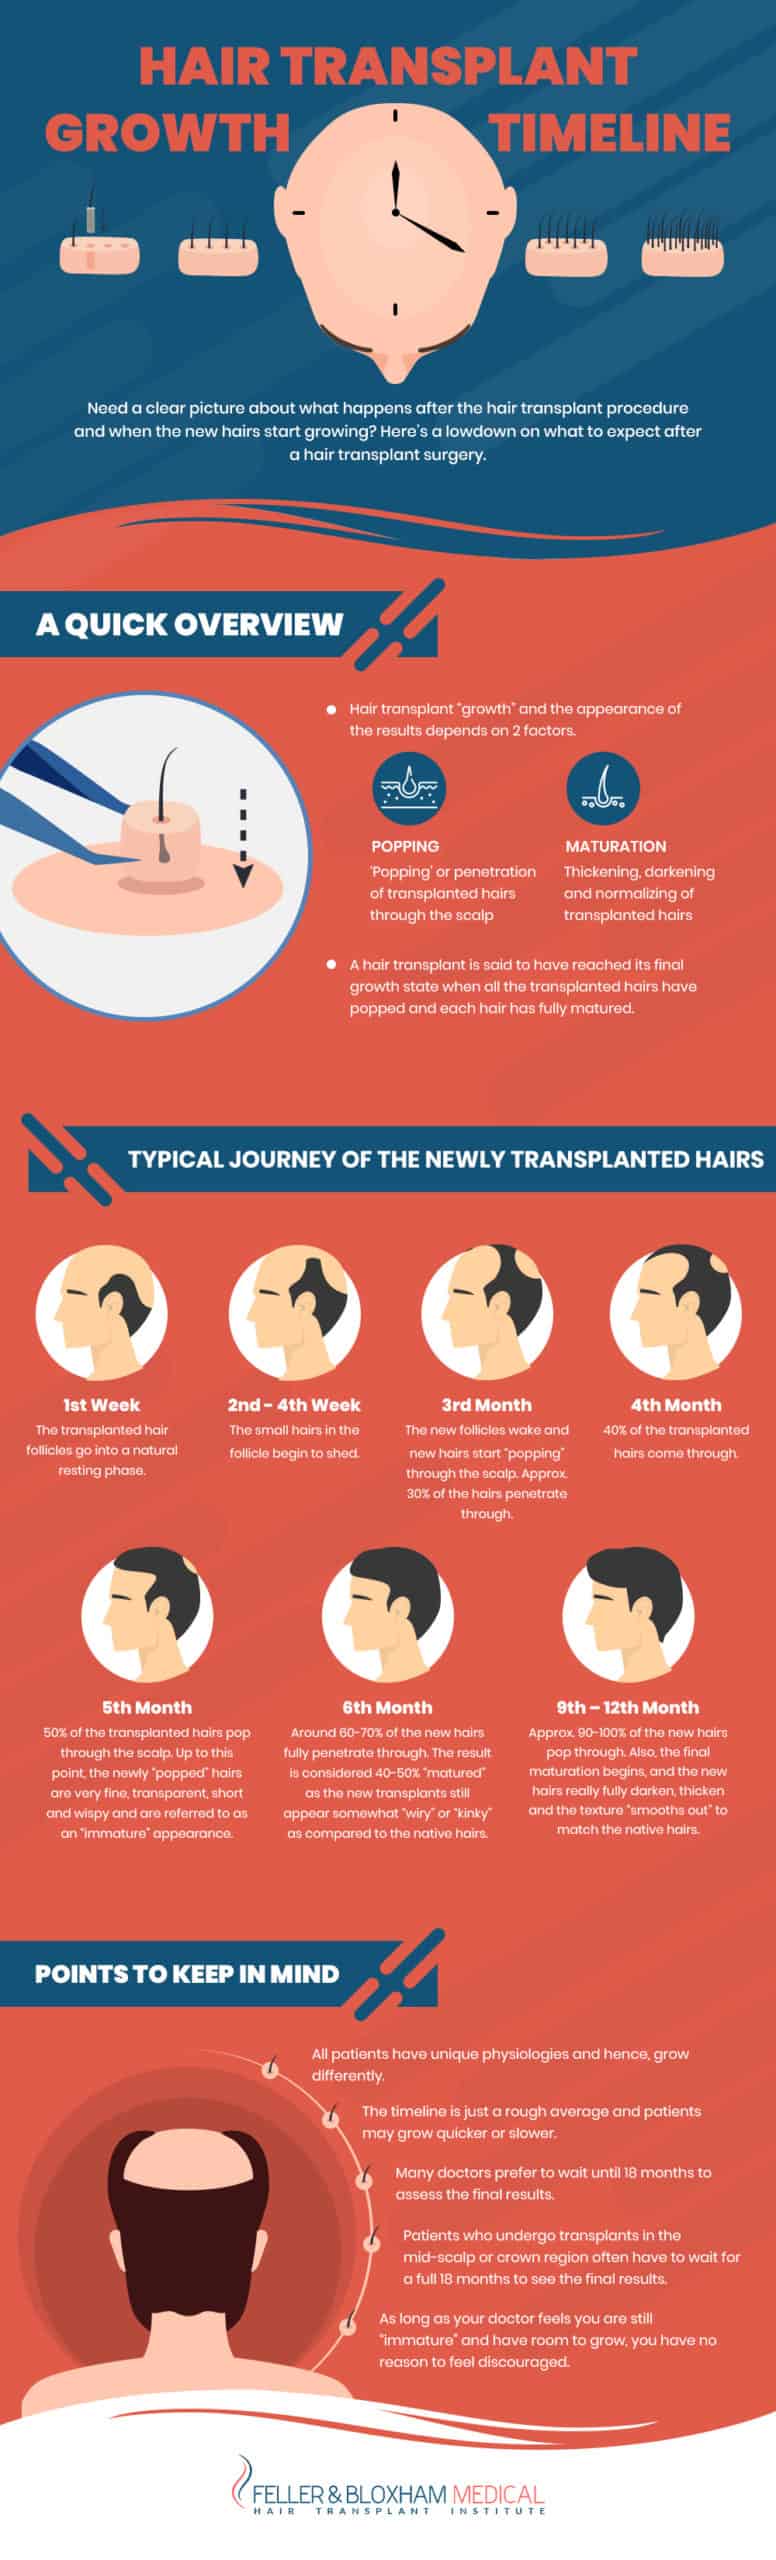 Overview of Hair Transplant Growth Timeline